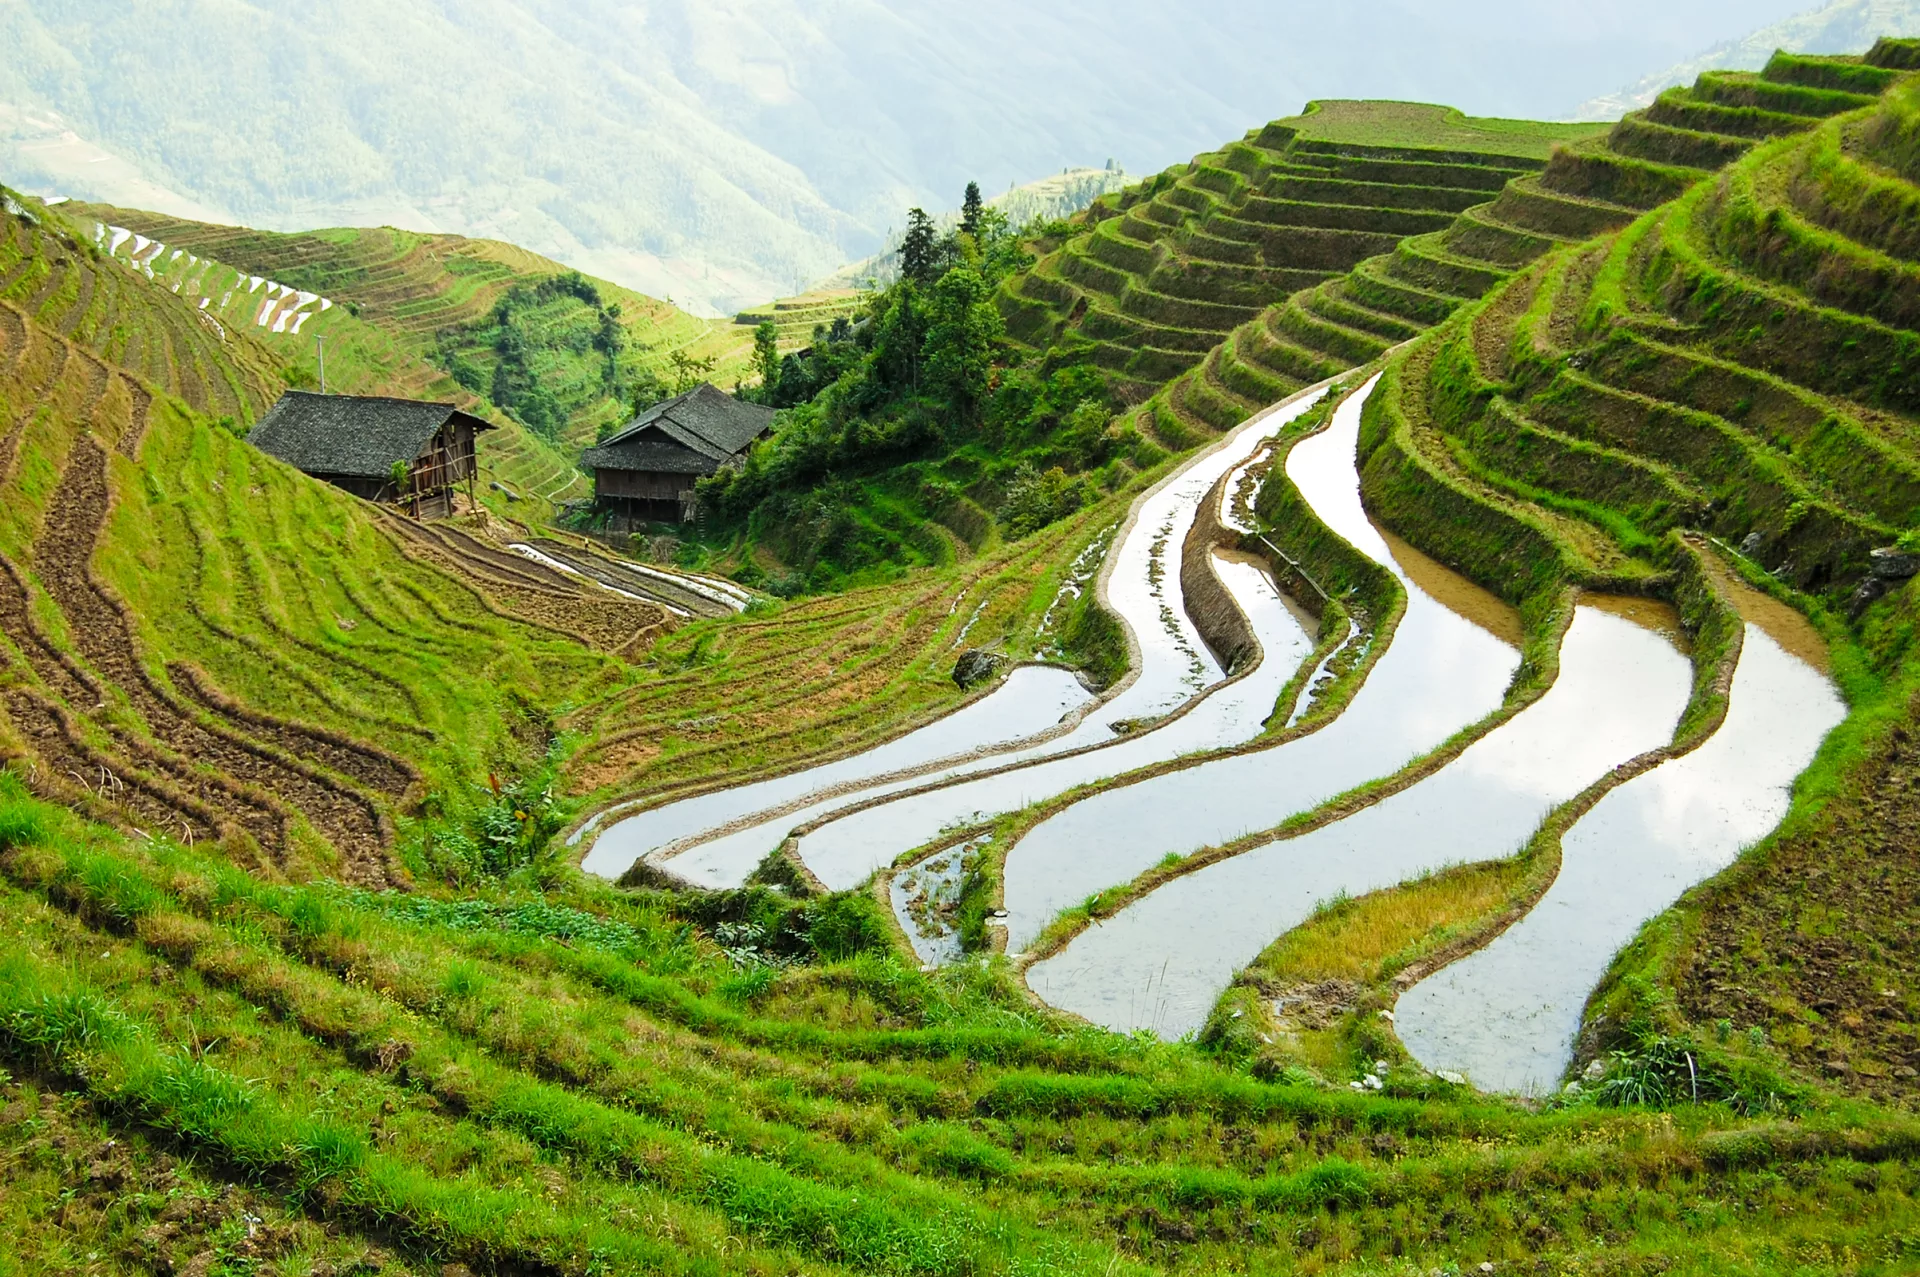 <p>It became widespread in China during the Han dynasty. It allowed farmers to <strong>cultivate crops on steep slopes</strong>, which allowed them to take advantage of their <strong>mountainous region</strong>. It also prevented soil erosion and conserved water.</p><p>**China wasn’t the only region that used it. This was a common practice in many different parts of the world including the Americas.</p>